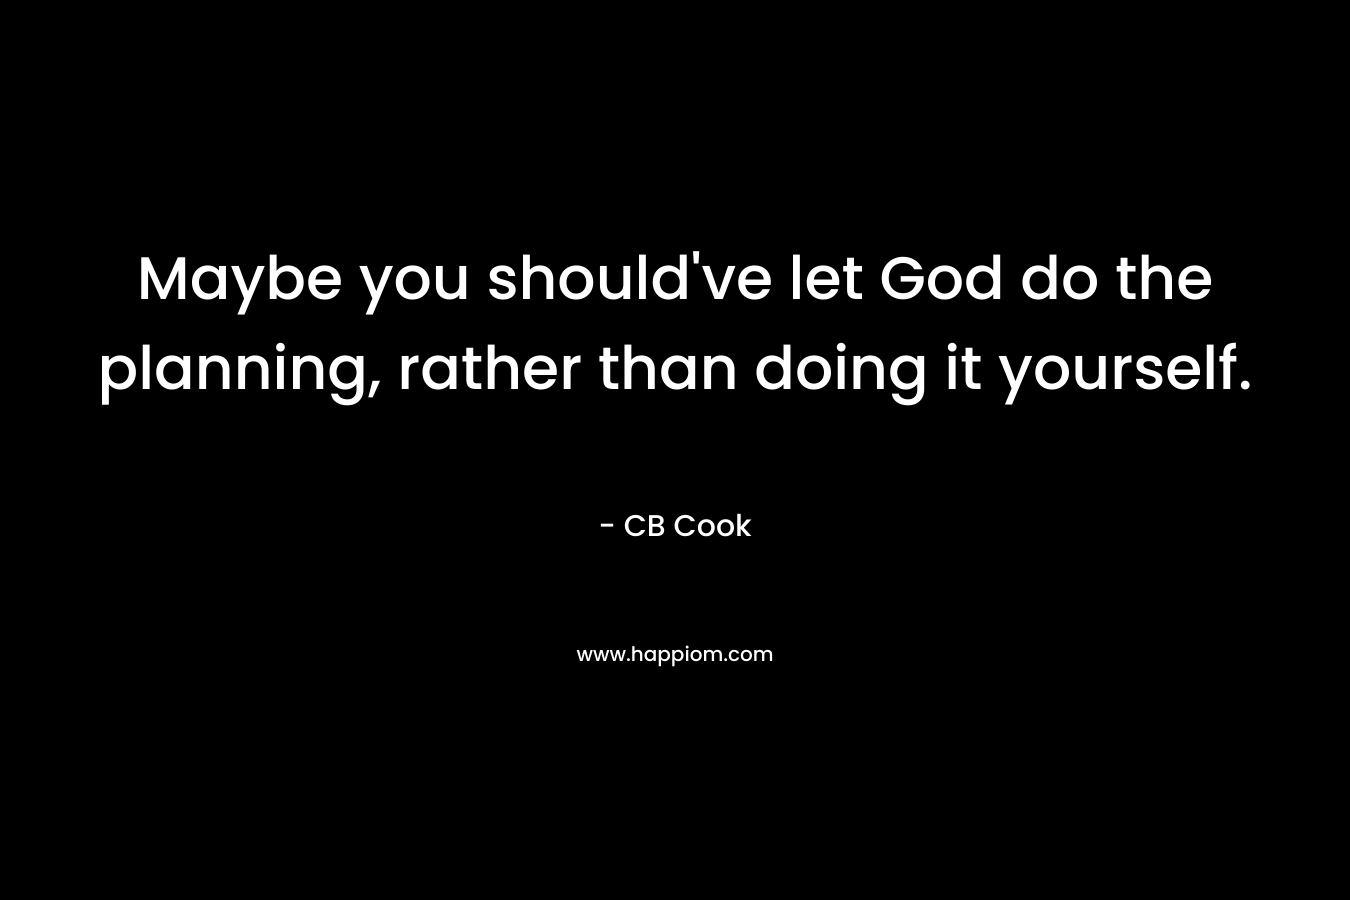 Maybe you should’ve let God do the planning, rather than doing it yourself. – CB Cook